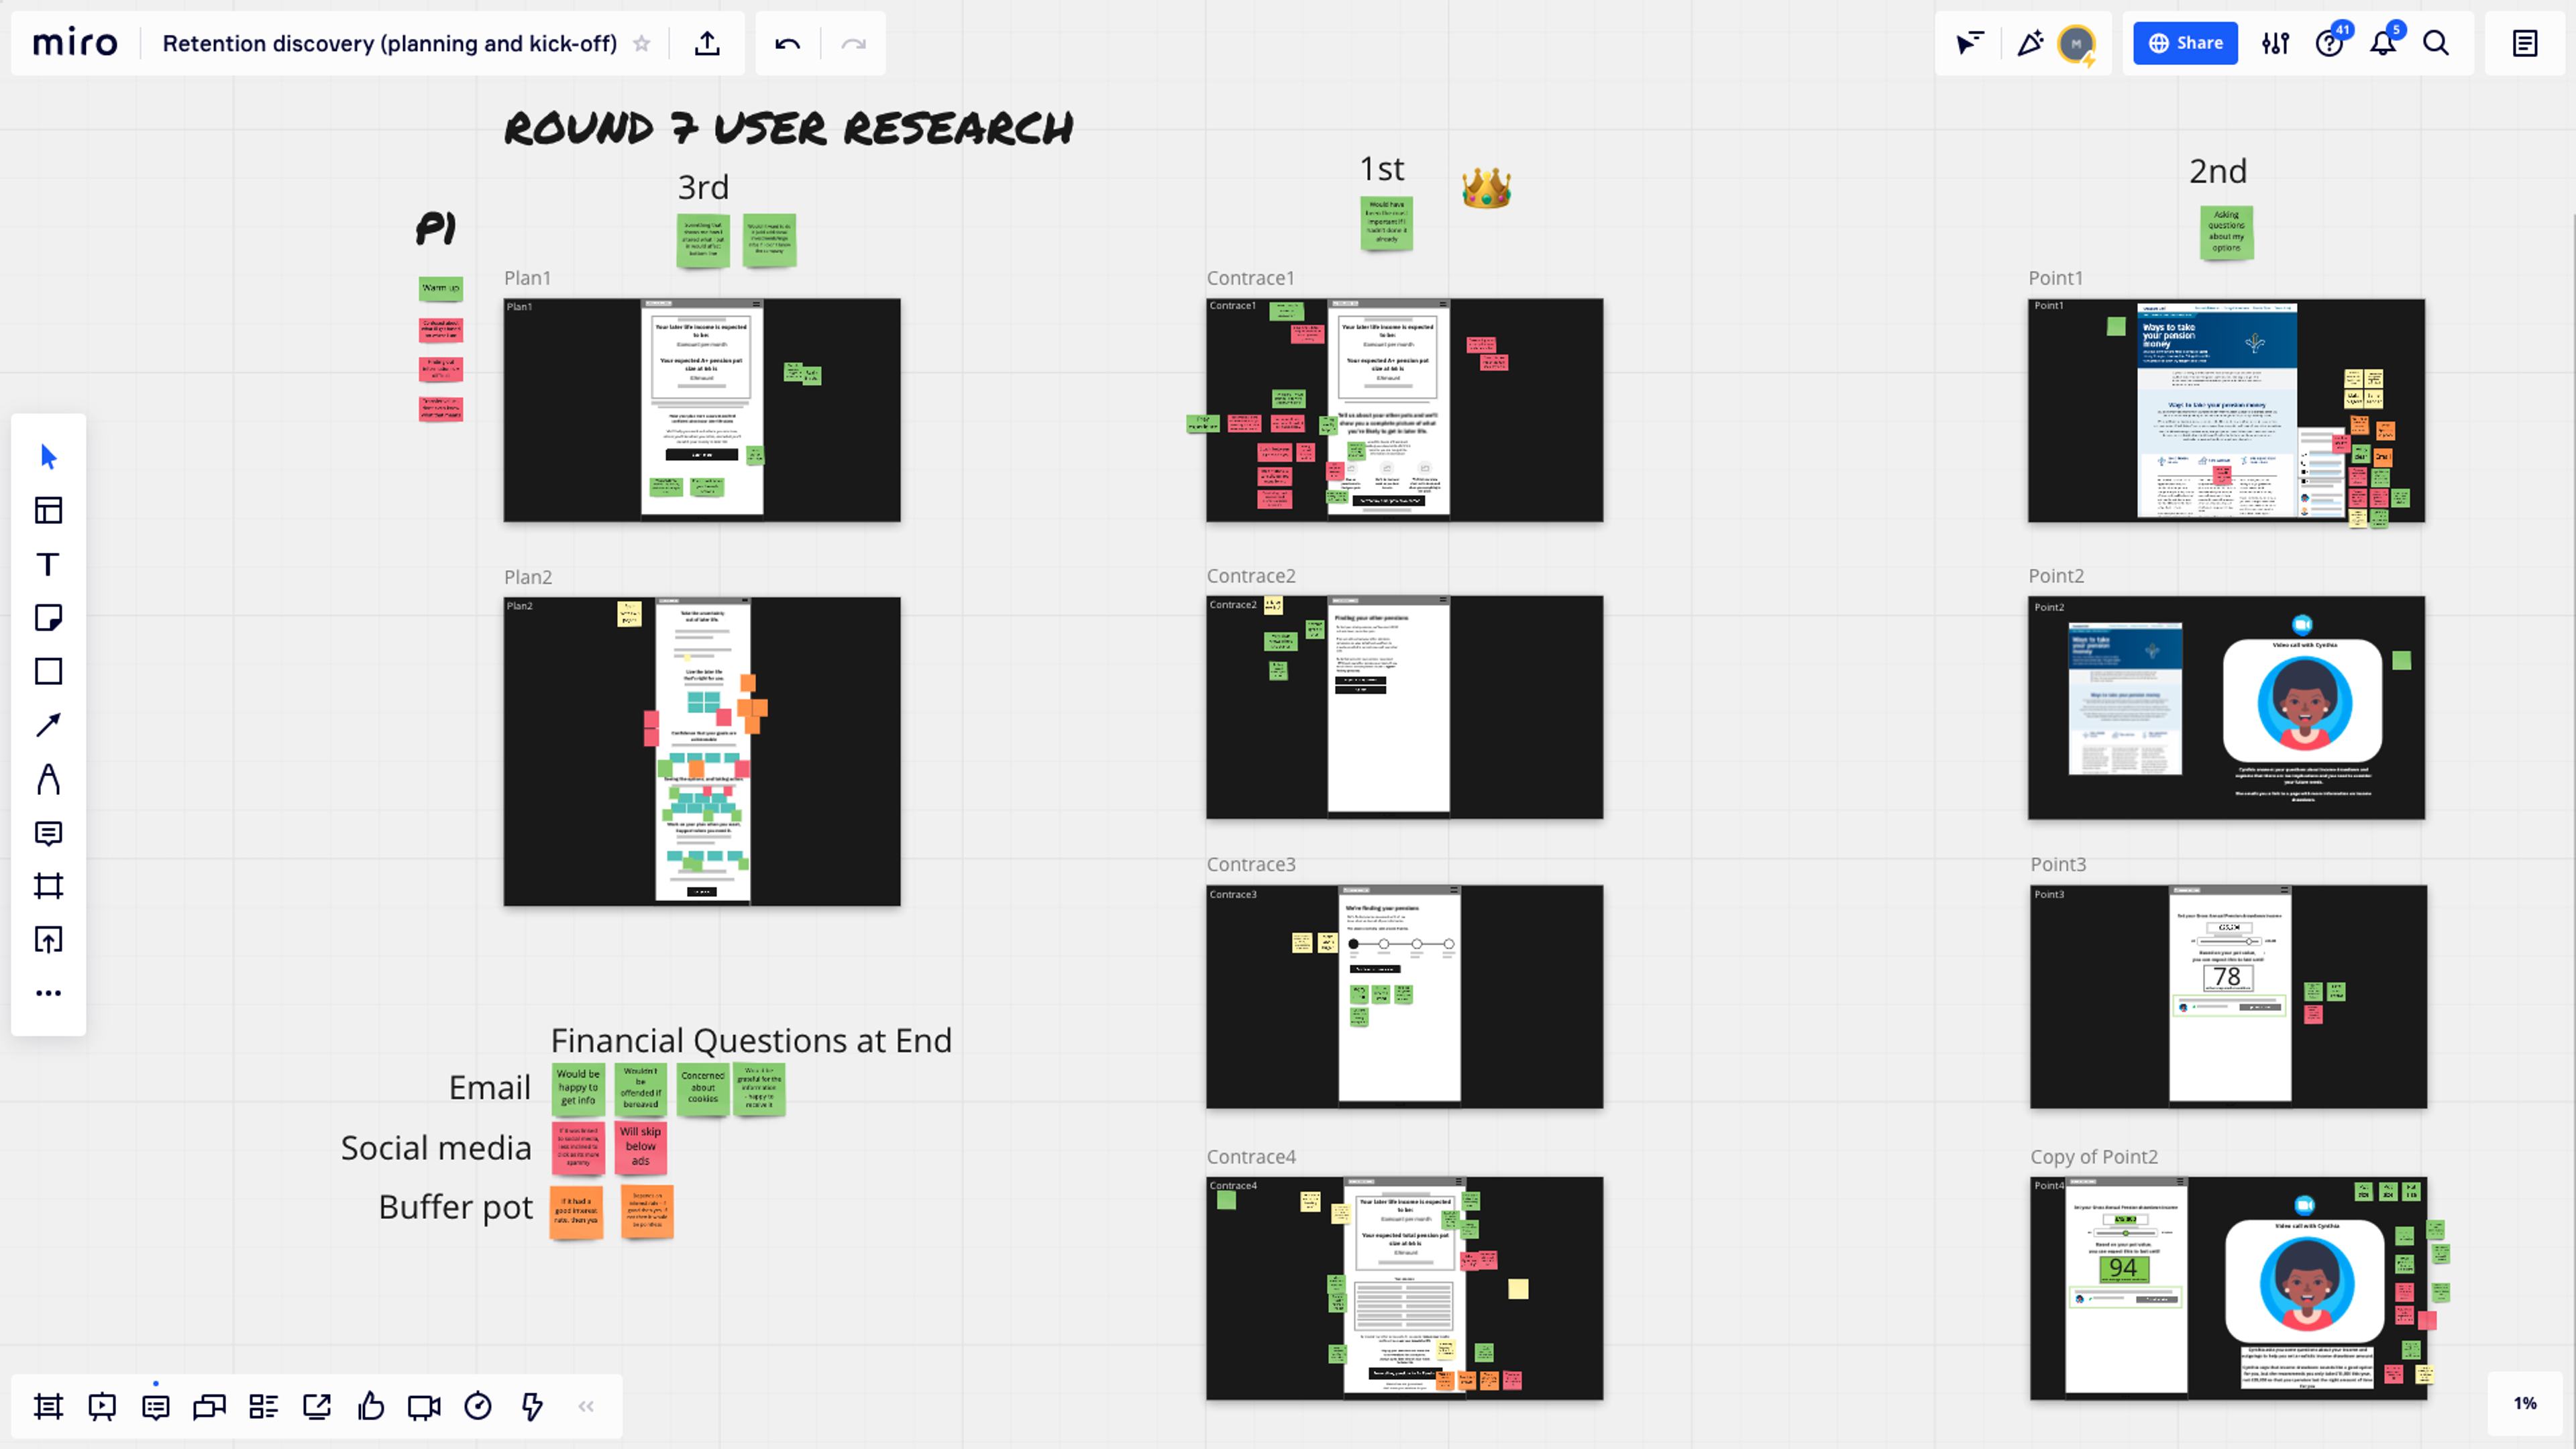 A screengrab of some of the work on user research with a financial institution